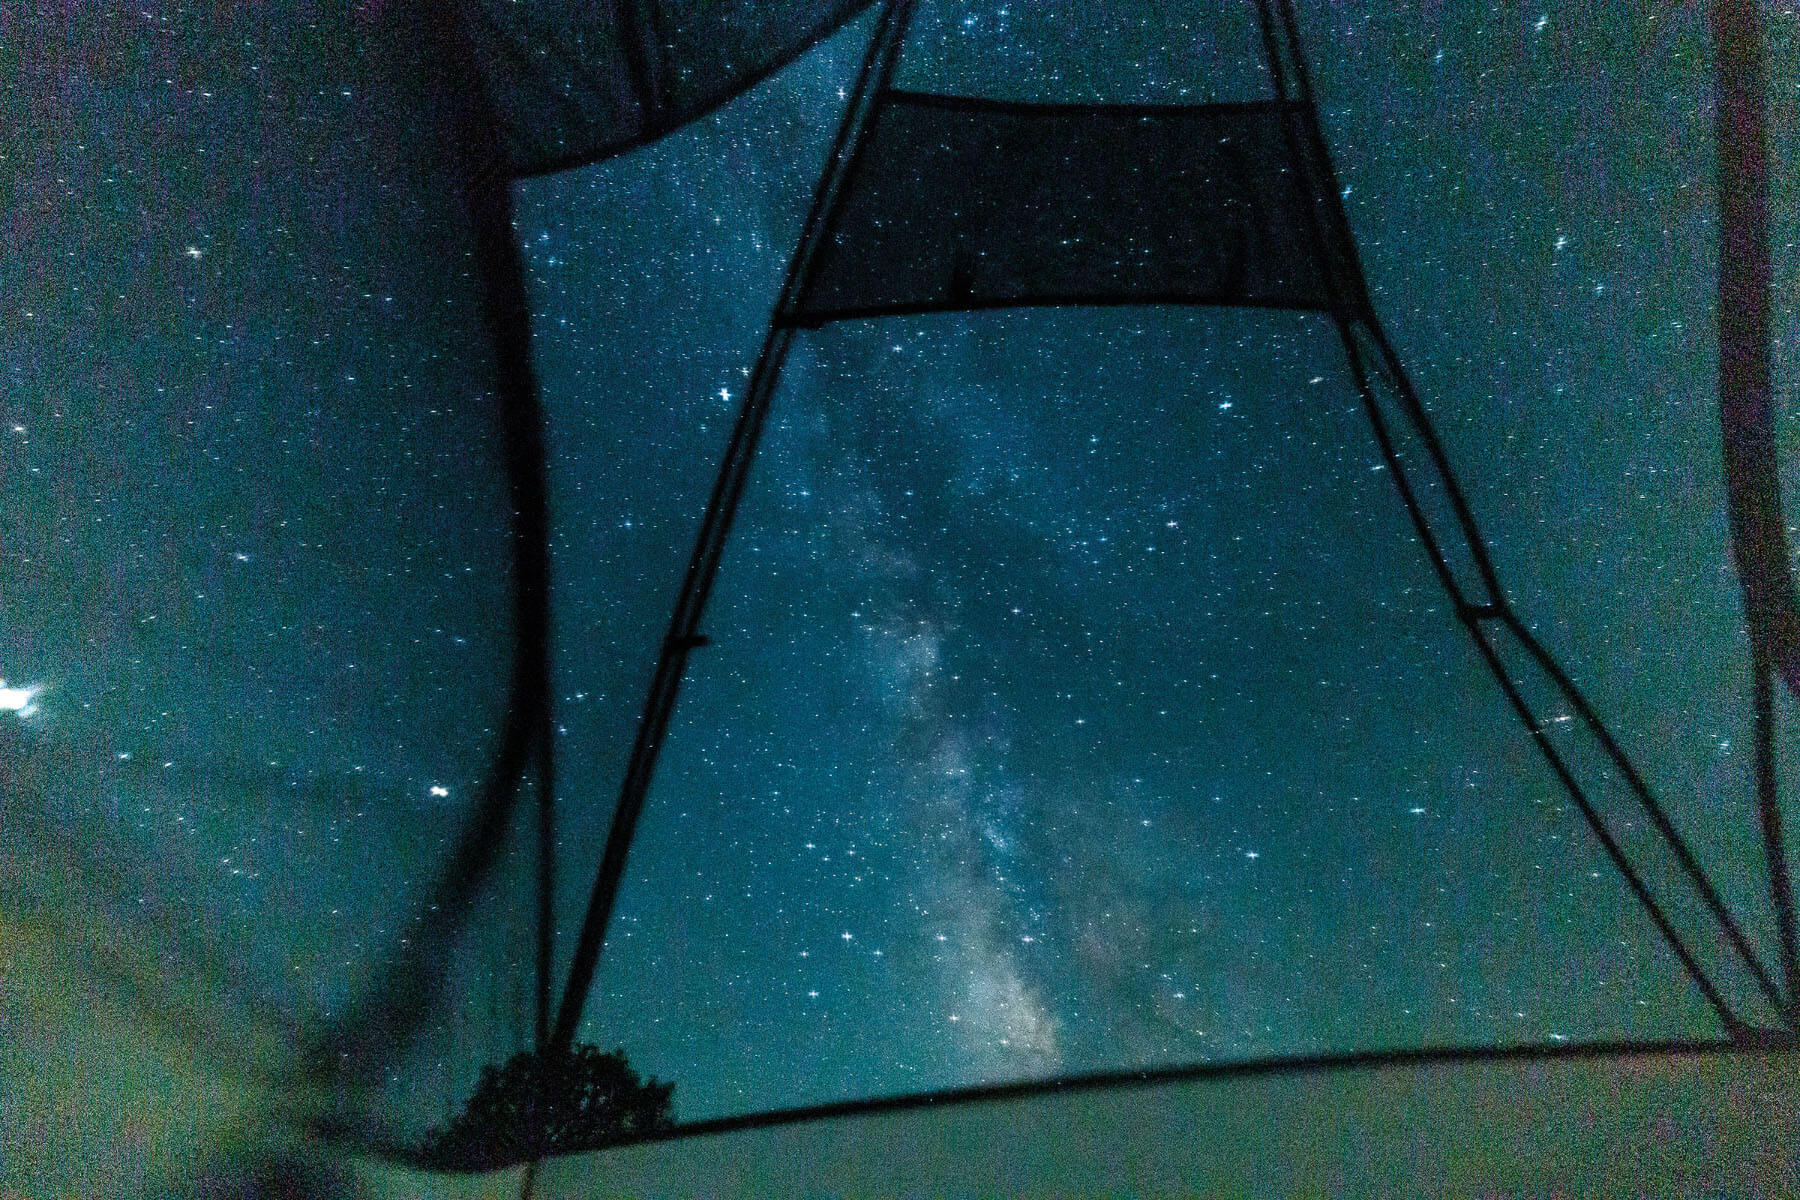 A dark bluish black sky with bright stars peeks through vents in the roof of a tent